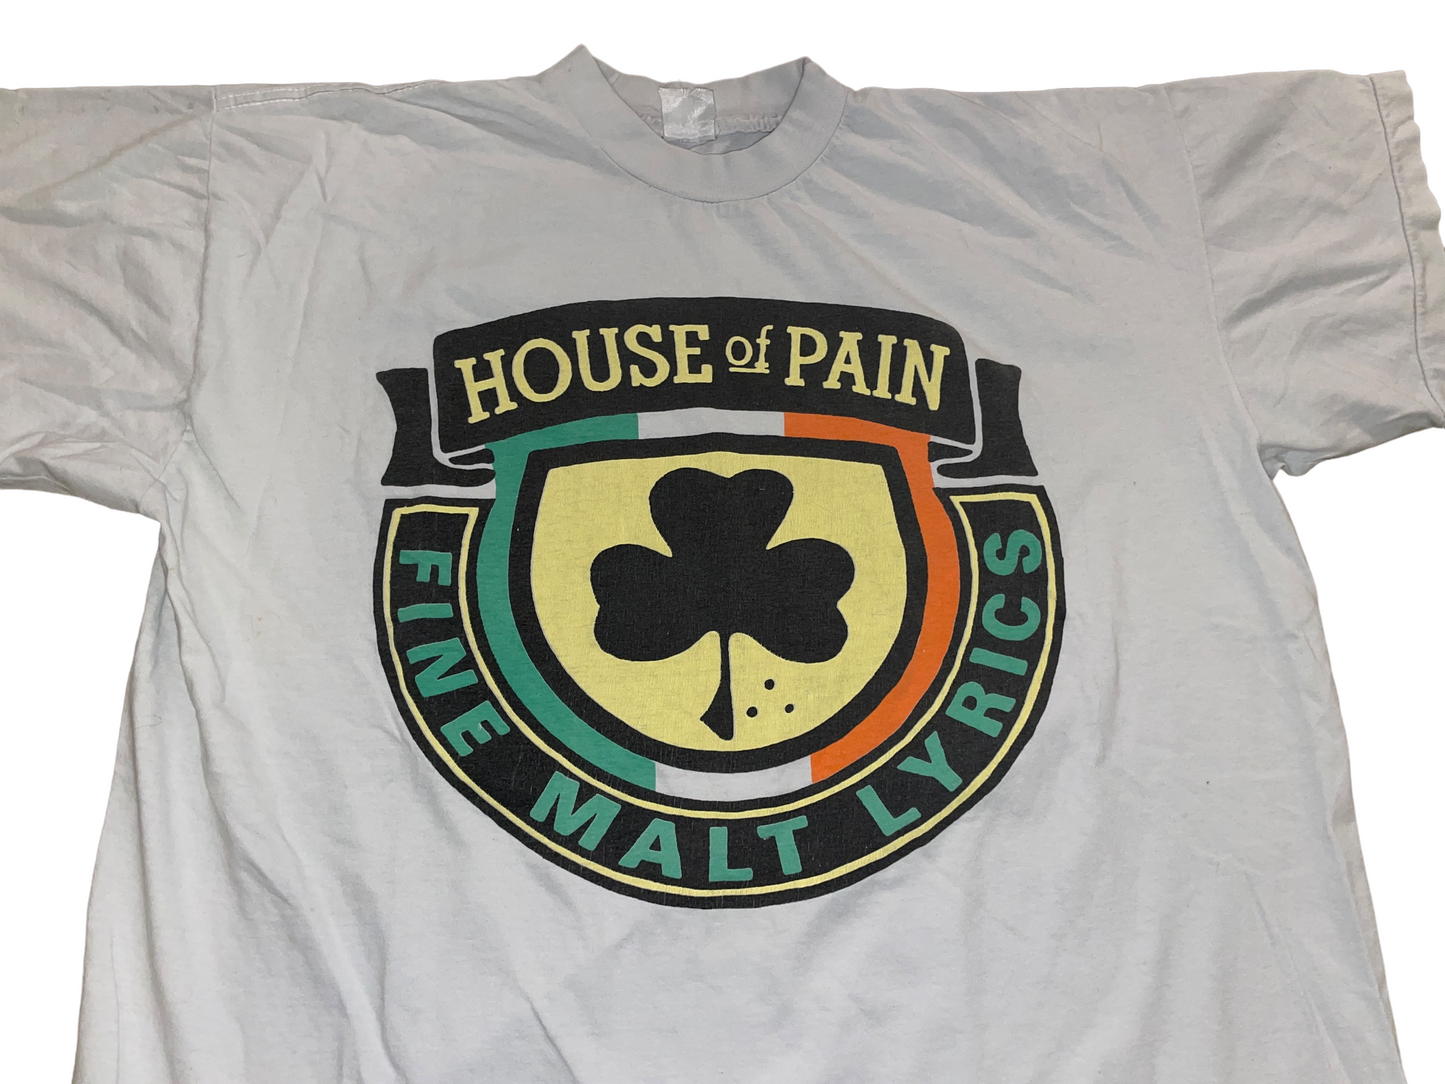 Vintage 90's House of Pain T-Shirt